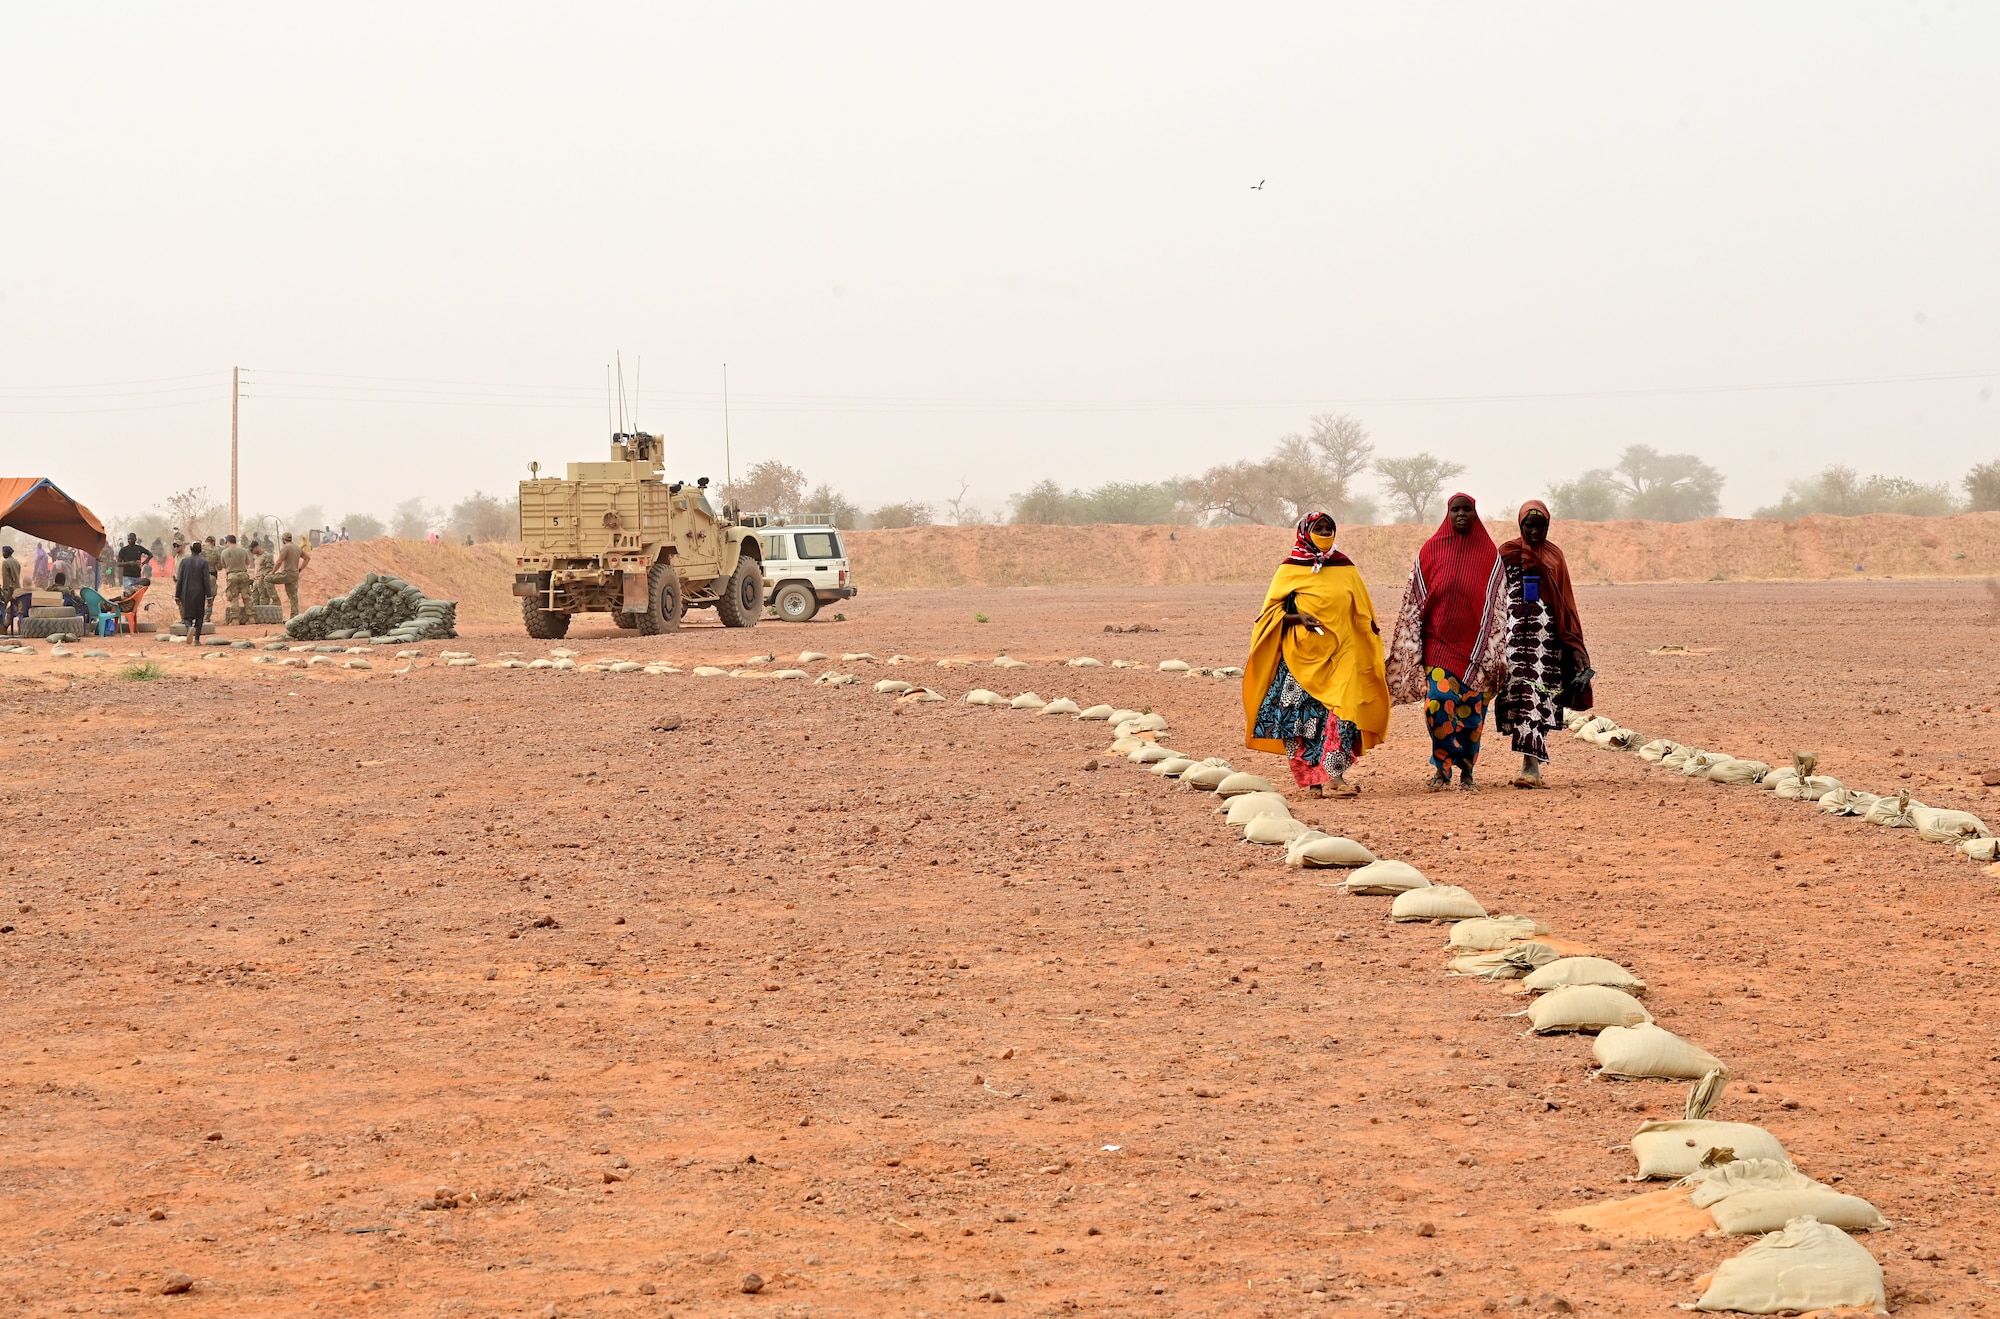 Three Nigerien women walk towards the medical tent during a medical civic action program (MEDCAP) in Ouallam, Niger, March 16, 2022. The Niger-U.S. joint MEDCAP provided medical treatment to approximately 550 patients, ranging from babies to the elderly. Engagements such as this increase cultural awareness, strengthen relationships and help U.S. service members understand problems local villagers face.  (U.S. Air Force photo by Tech. Sgt. Stephanie Longoria)